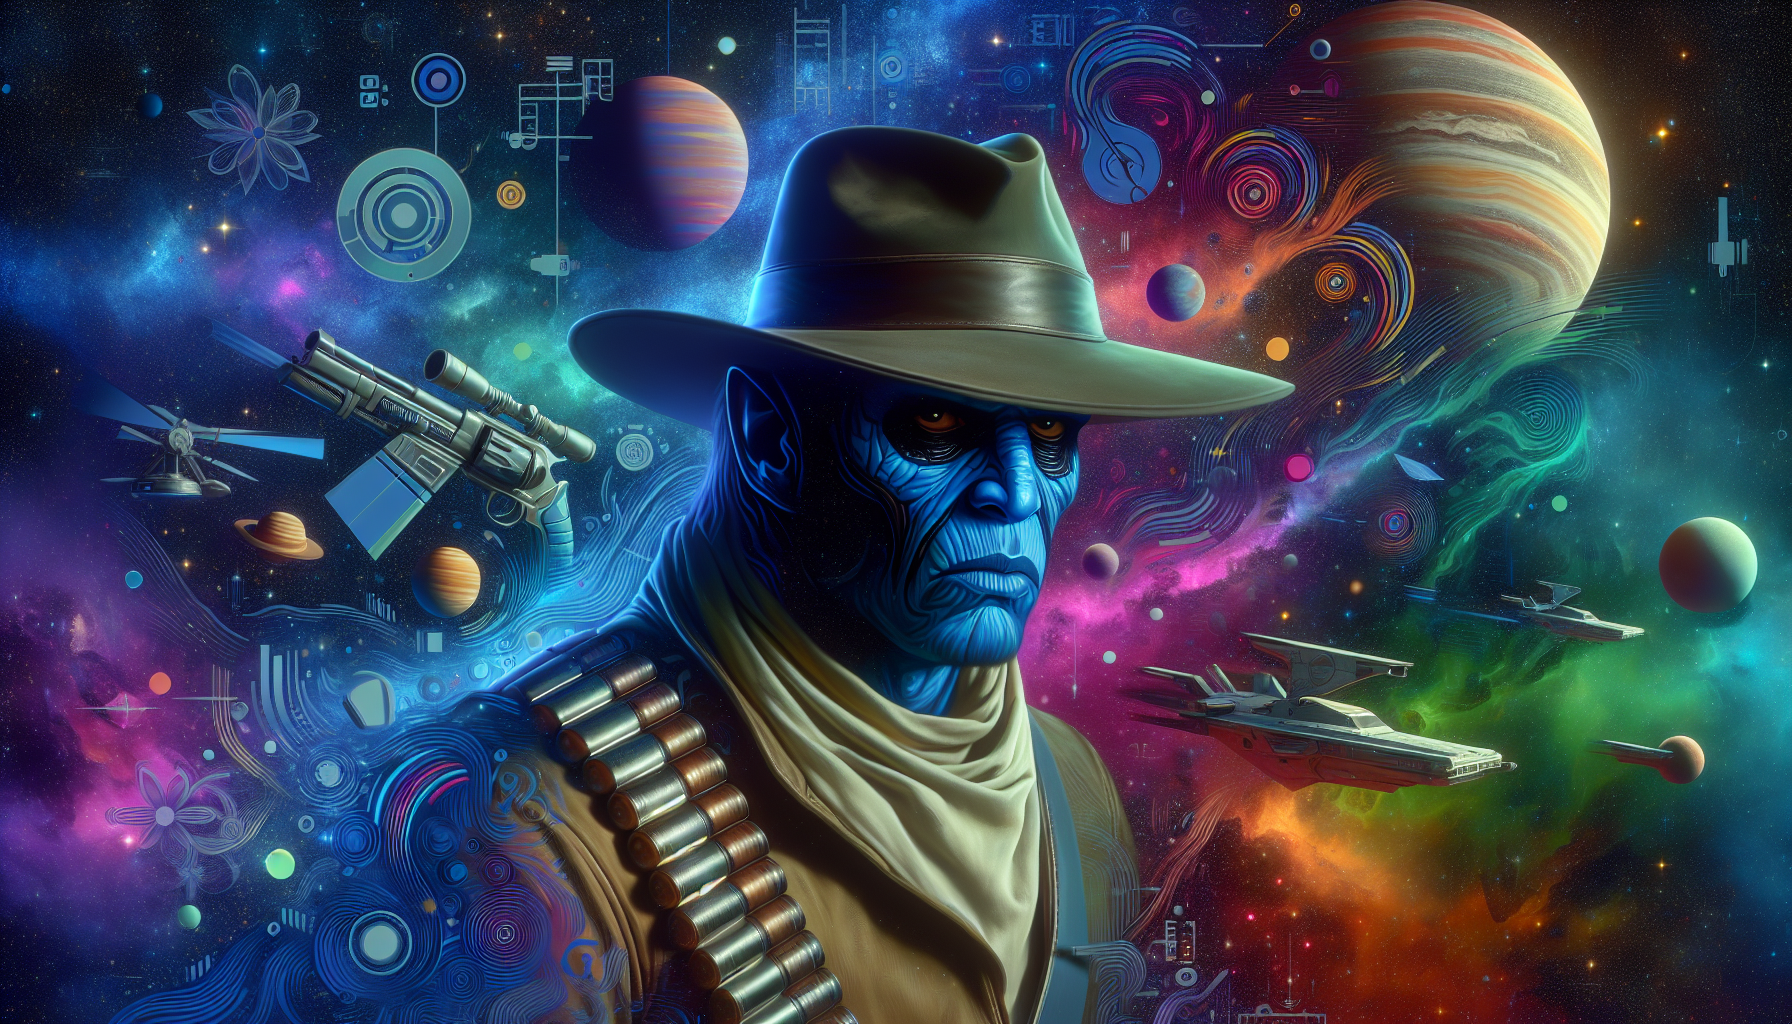 An imaginative portrayal of a notorious bounty hunter from a popular space fantasy saga, who wears wide-brimmed hats and has blue skin. Visually delve into his future within this expansive cosmos. The image should adopt a modern aesthetic, with vibrant and diverse colors inspired by futuristic environments. Consider utilizing symbols, objects, or environments that might hint towards the character's destiny within the narrative. Remember, this piece should be void of textual elements.